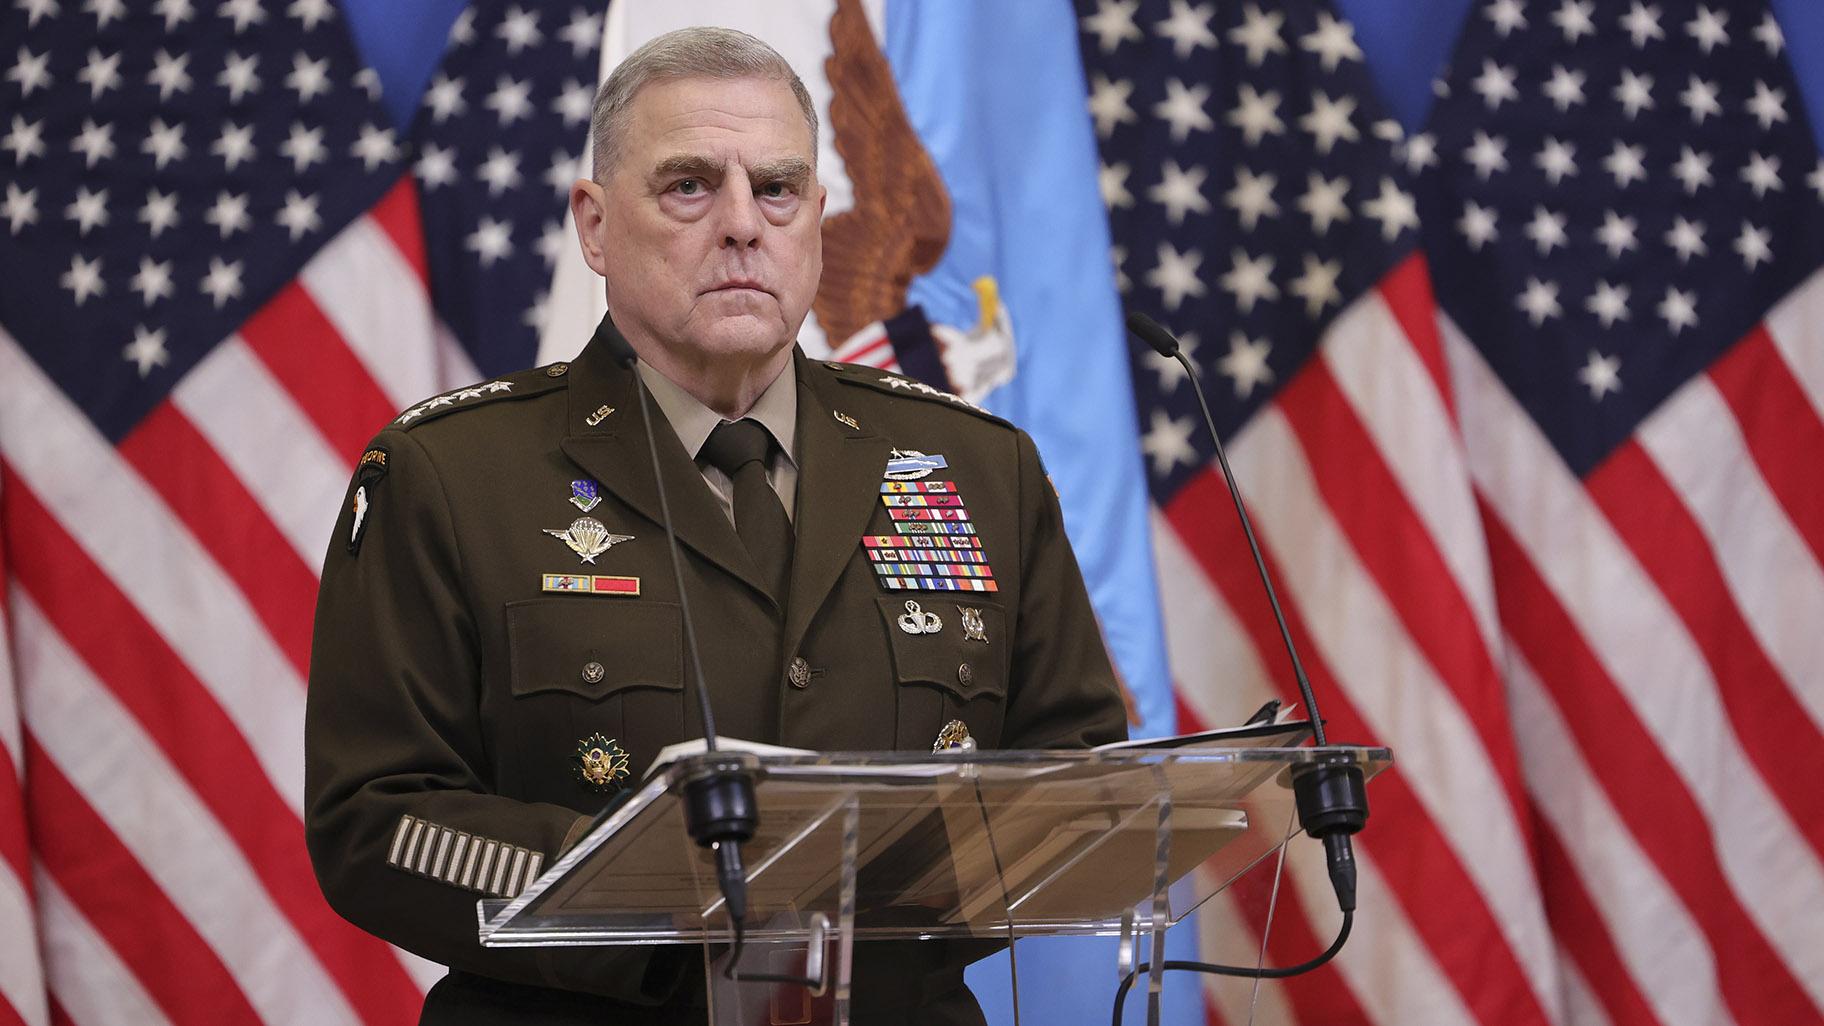 U.S. Joint Chiefs Chairman Gen. Mark Milley speaks during a media conference after a meeting of NATO defense ministers at NATO headquarters in Brussels, Tuesday, Feb. 14, 2023. (AP Photo / Olivier Matthys)